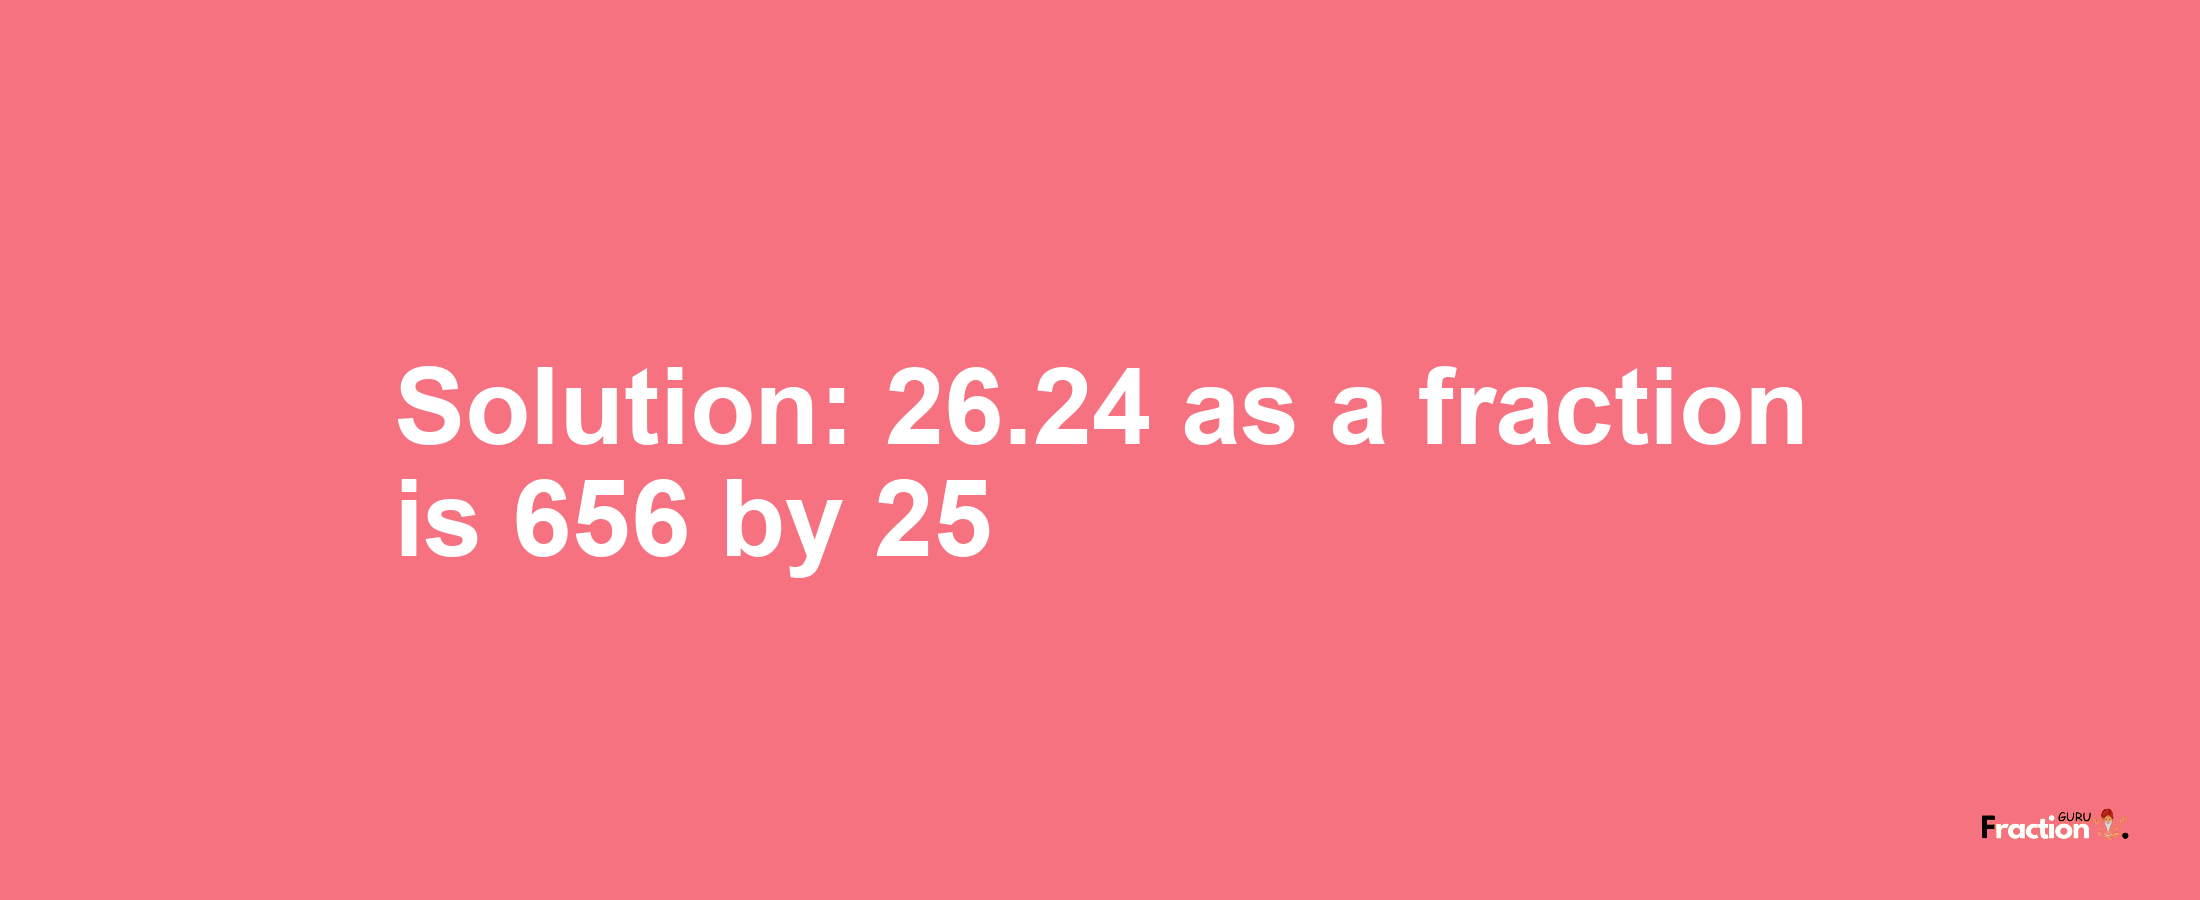 Solution:26.24 as a fraction is 656/25